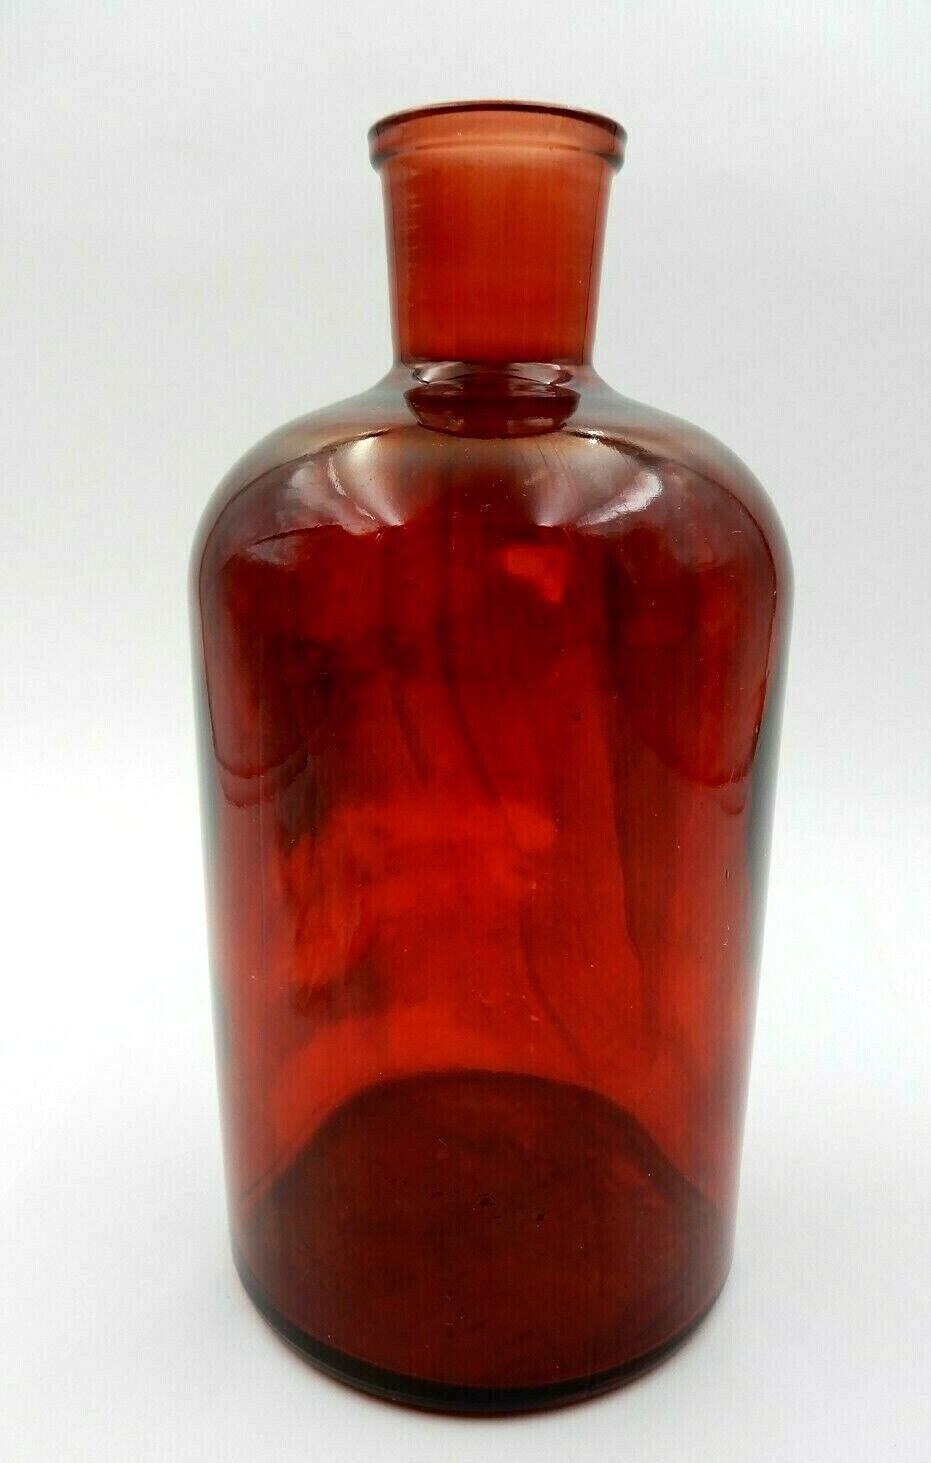 VINTAGE Max 54% Super intense SALE OFF PYREX #29 RUBY RED APOTHECARY D4 BOTTLE JAR - PHARMACY